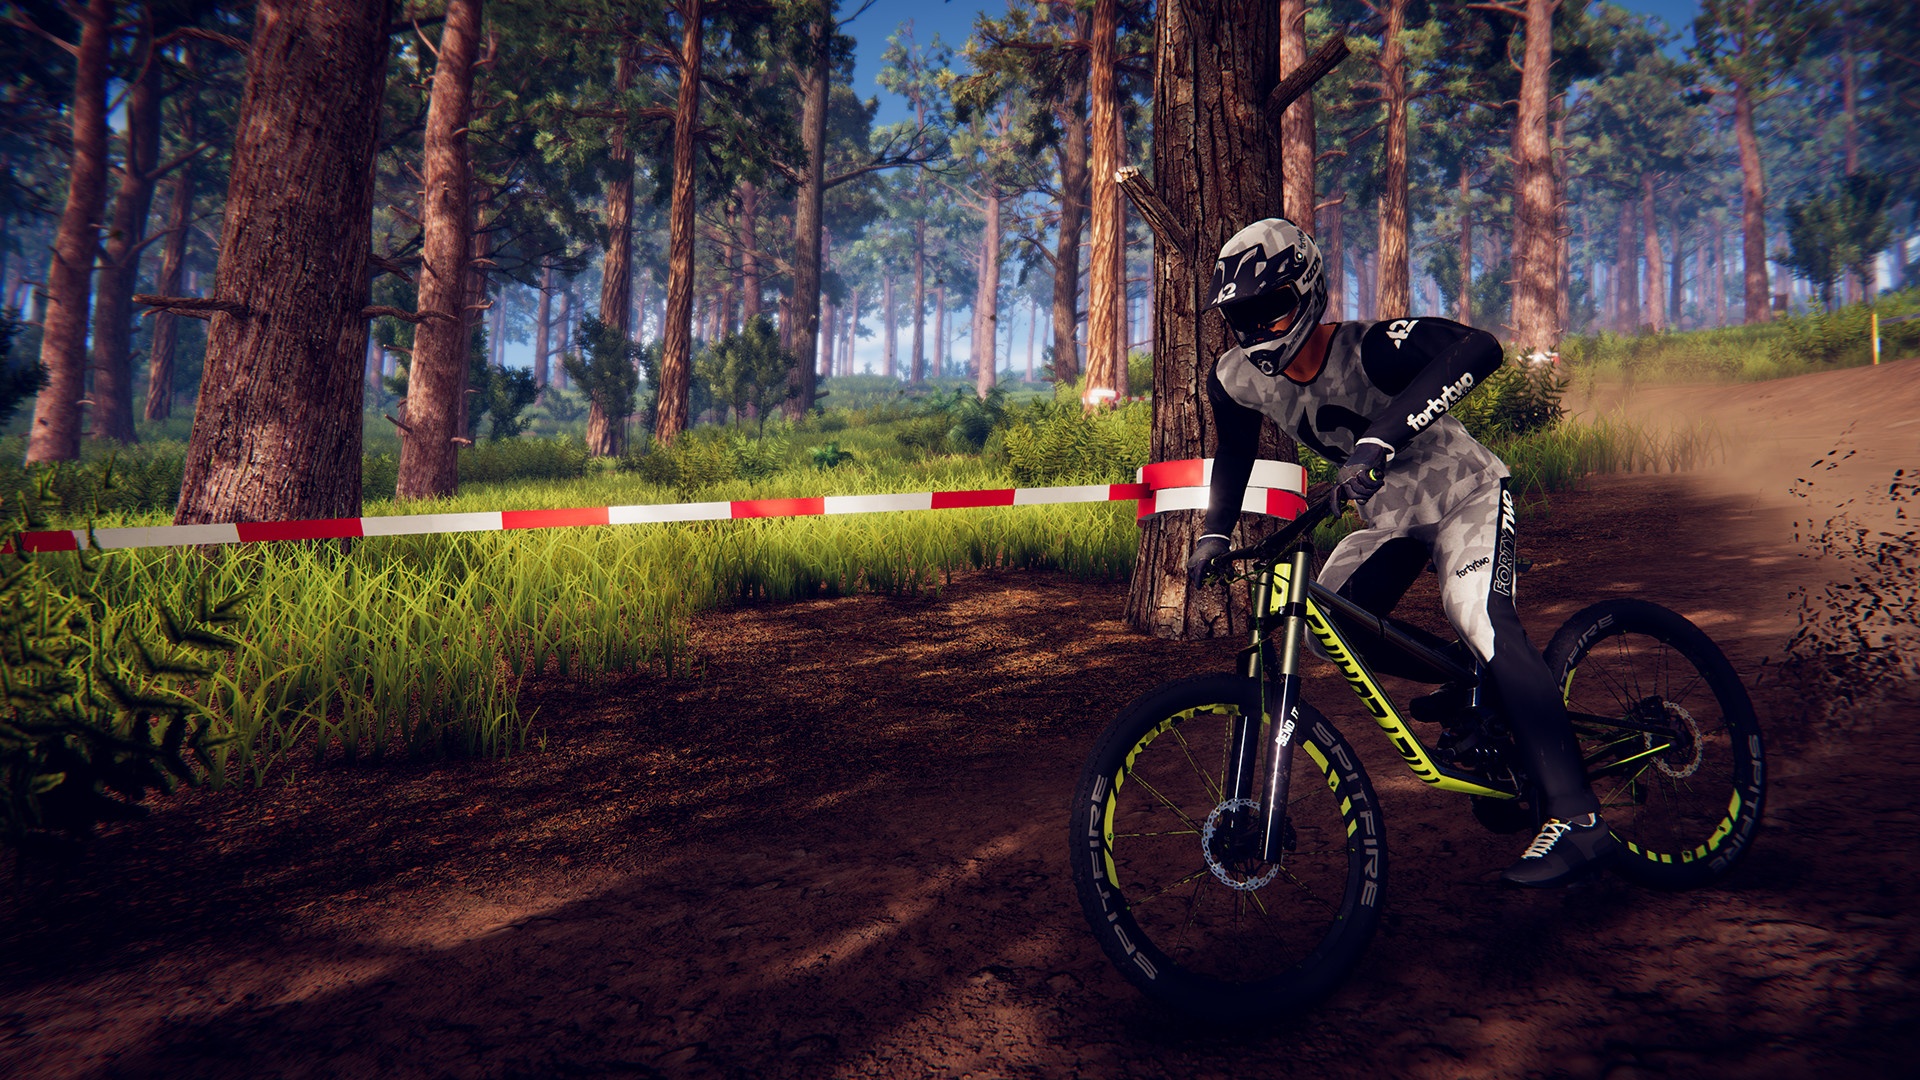 Action, Action Henk, arcade, Bikes, Biking, cycling, Descenders, Descenders Preview, Driving, Early Access, No More Robots, PC, Preview, Racing, RageSquid, Sports